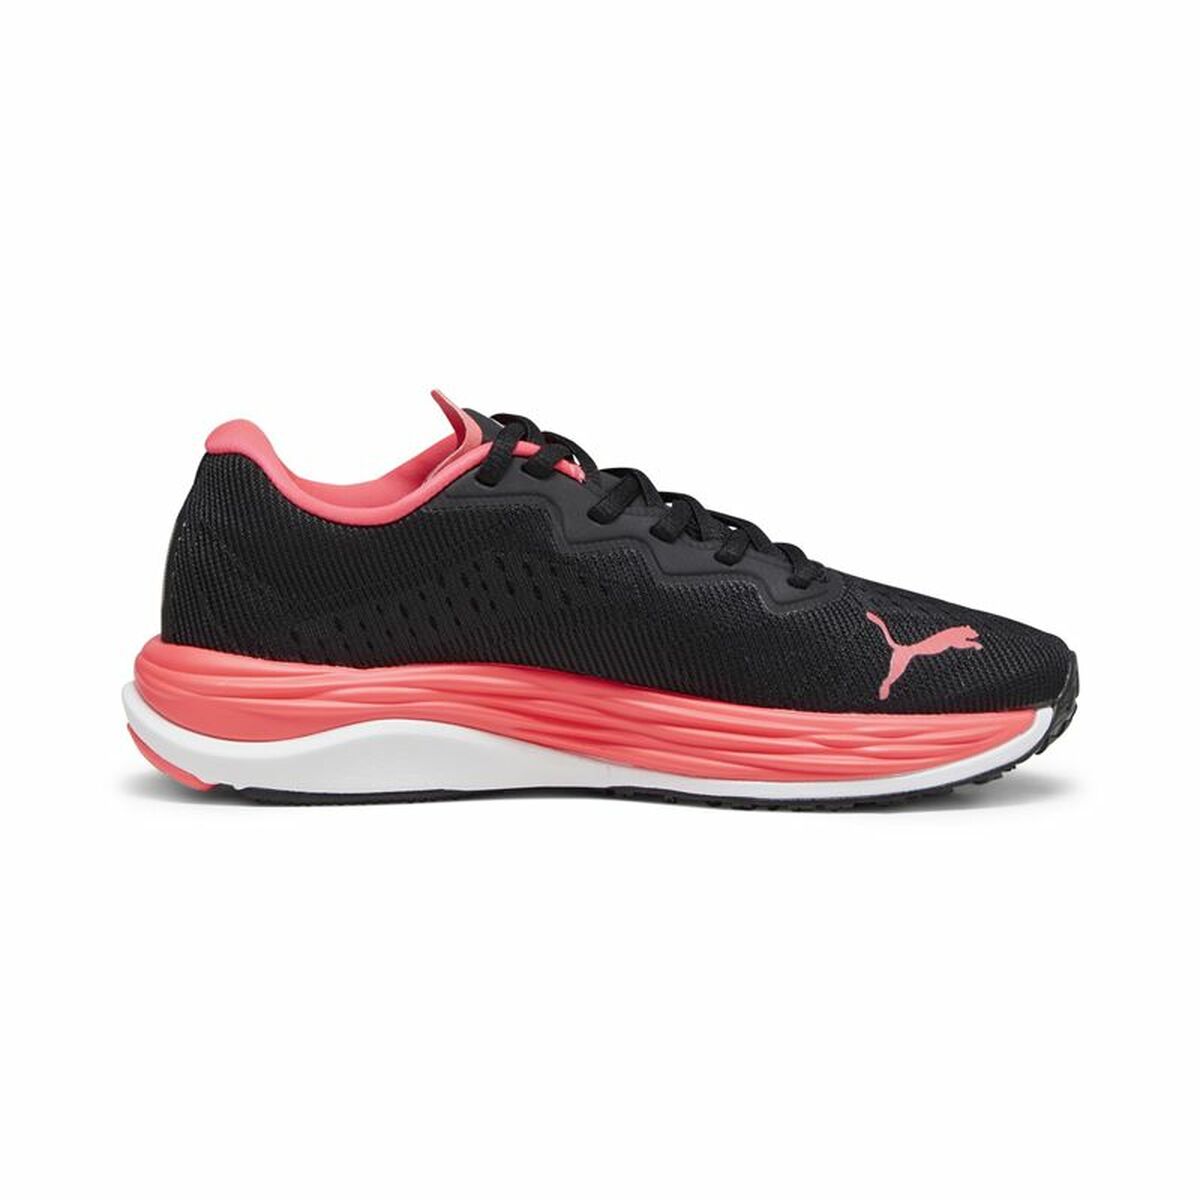 Running Shoes for Adults Puma Velocity Nitro 2 Black